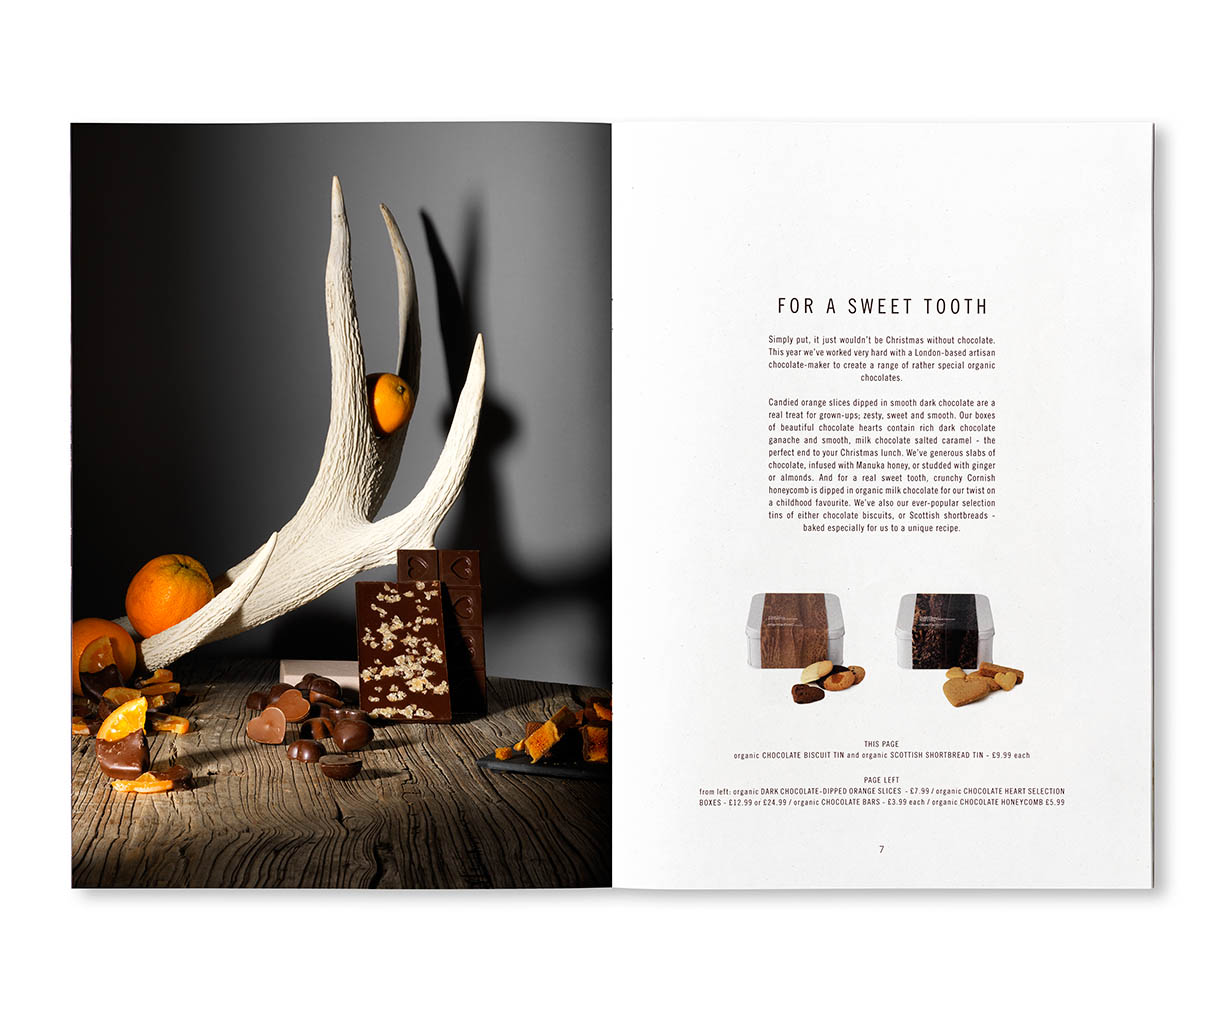 Artwork Photography of Daylesford Organic chocolate by Packshot Factory